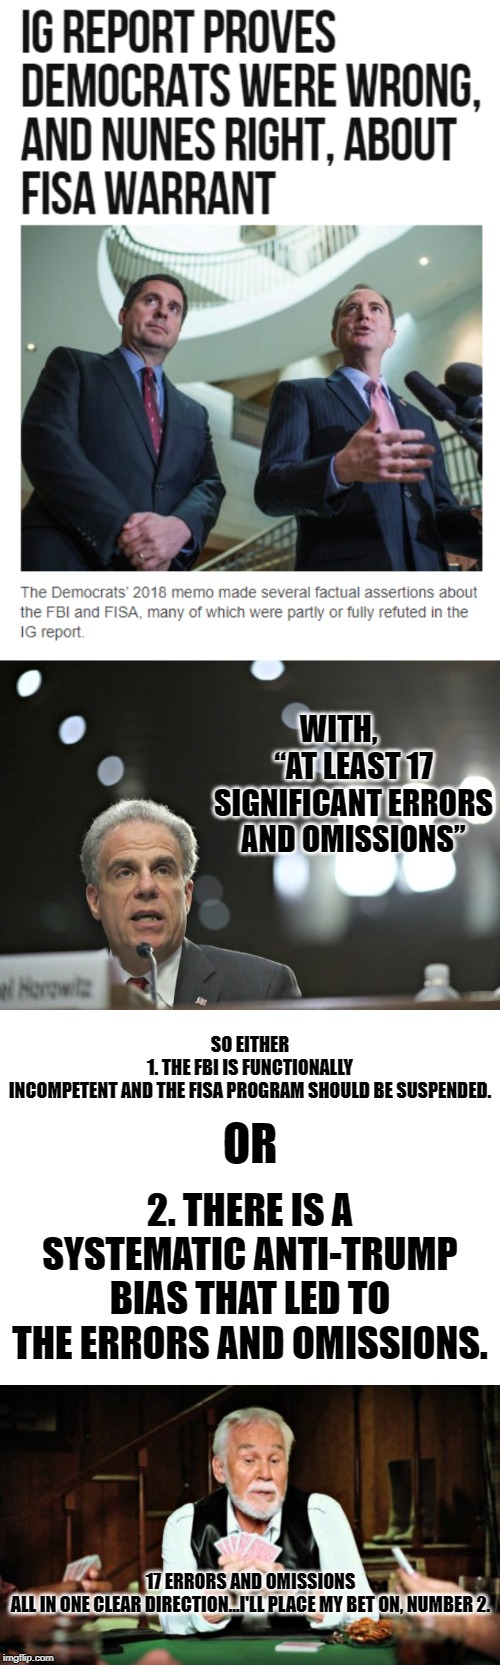 WITH,      “AT LEAST 17 SIGNIFICANT ERRORS AND OMISSIONS”; SO EITHER

1. THE FBI IS FUNCTIONALLY INCOMPETENT AND THE FISA PROGRAM SHOULD BE SUSPENDED. OR; 2. THERE IS A SYSTEMATIC ANTI-TRUMP BIAS THAT LED TO THE ERRORS AND OMISSIONS. 17 ERRORS AND OMISSIONS ALL IN ONE CLEAR DIRECTION...I'LL PLACE MY BET ON, NUMBER 2. | image tagged in blank white template,kenny rogers playing cards | made w/ Imgflip meme maker